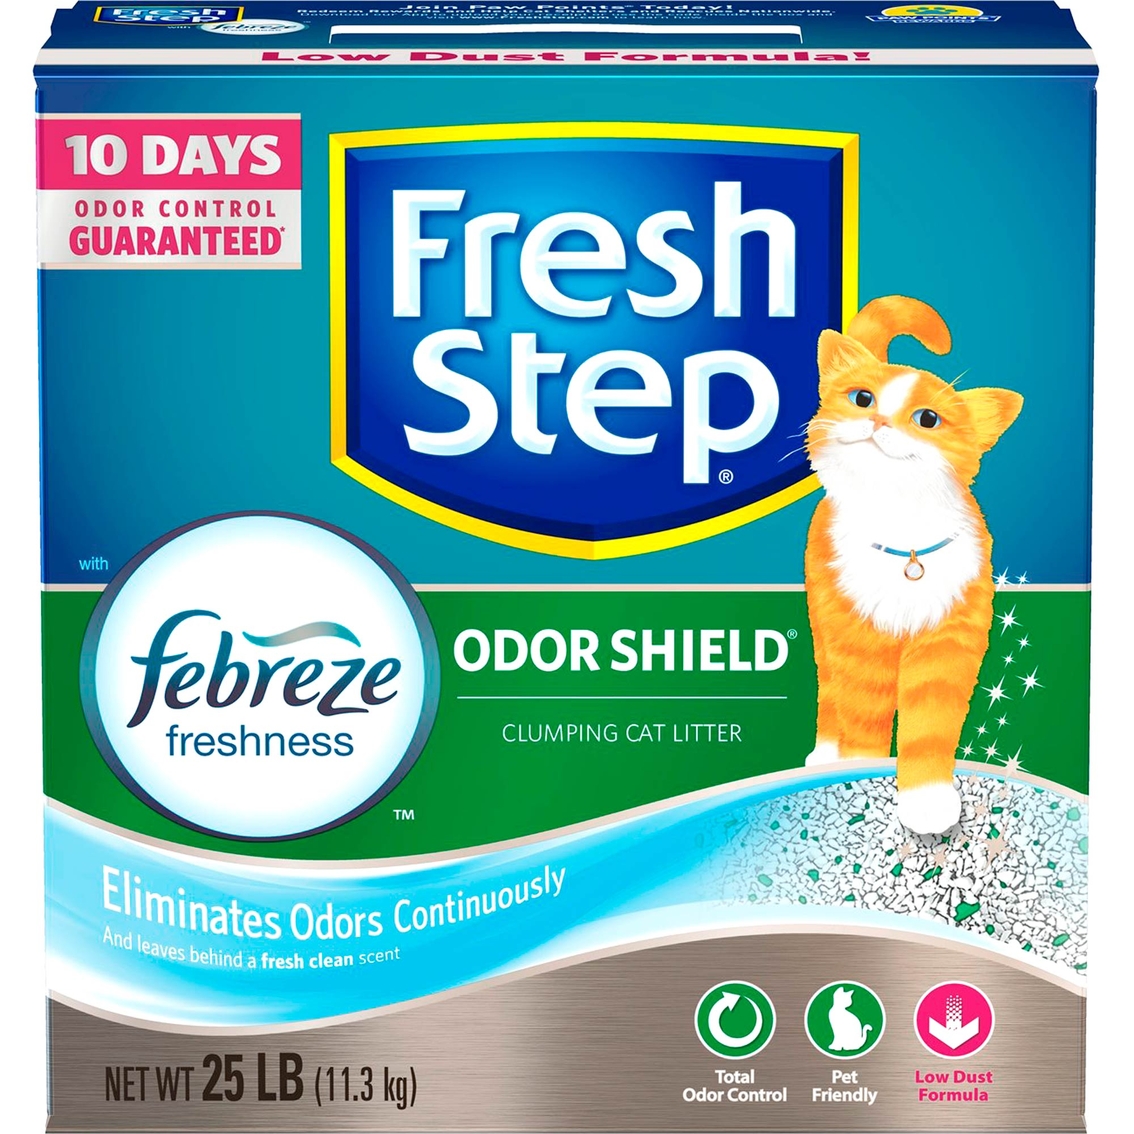 FRESH STEP Extreme Odor Control Febreze Scented Clumping Clay Cat